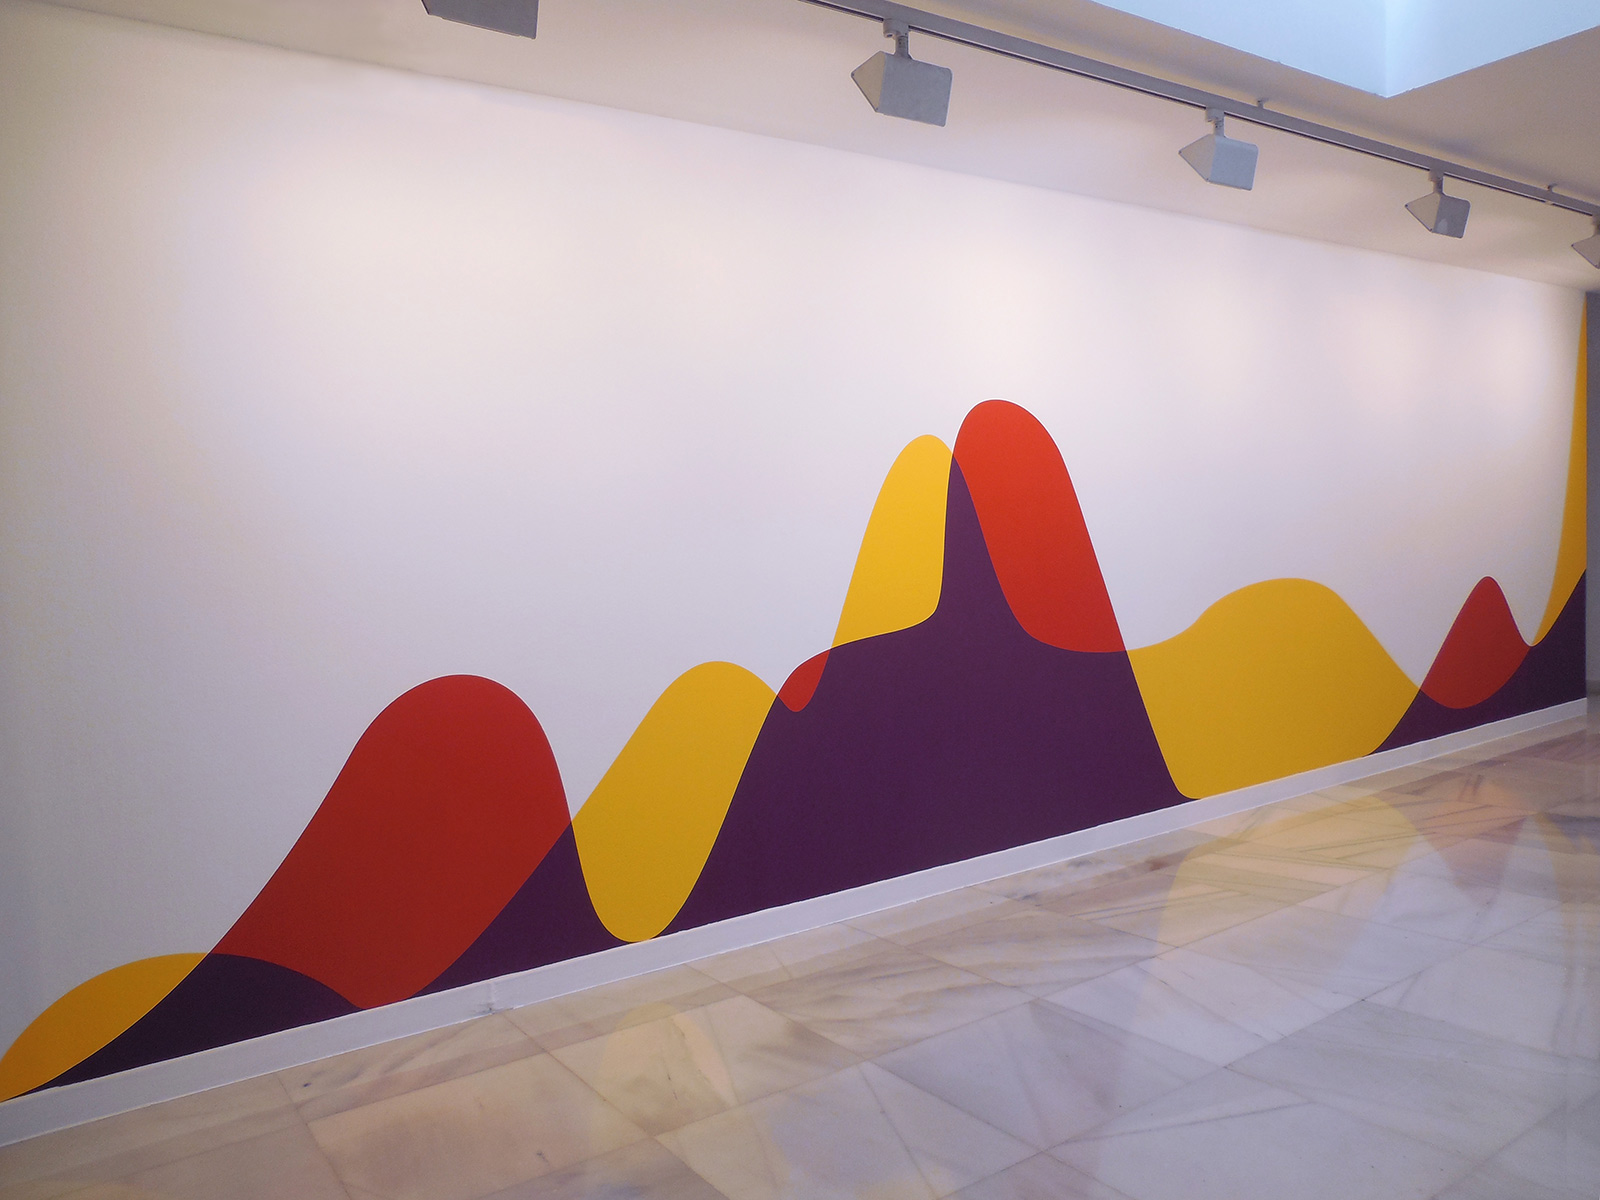 «Clara Muñoz's Curriculum Vitae. Publications and exhibitions 1996-2016», Ecological painting on wall, 254 x 820 cm, PSJM, 2016